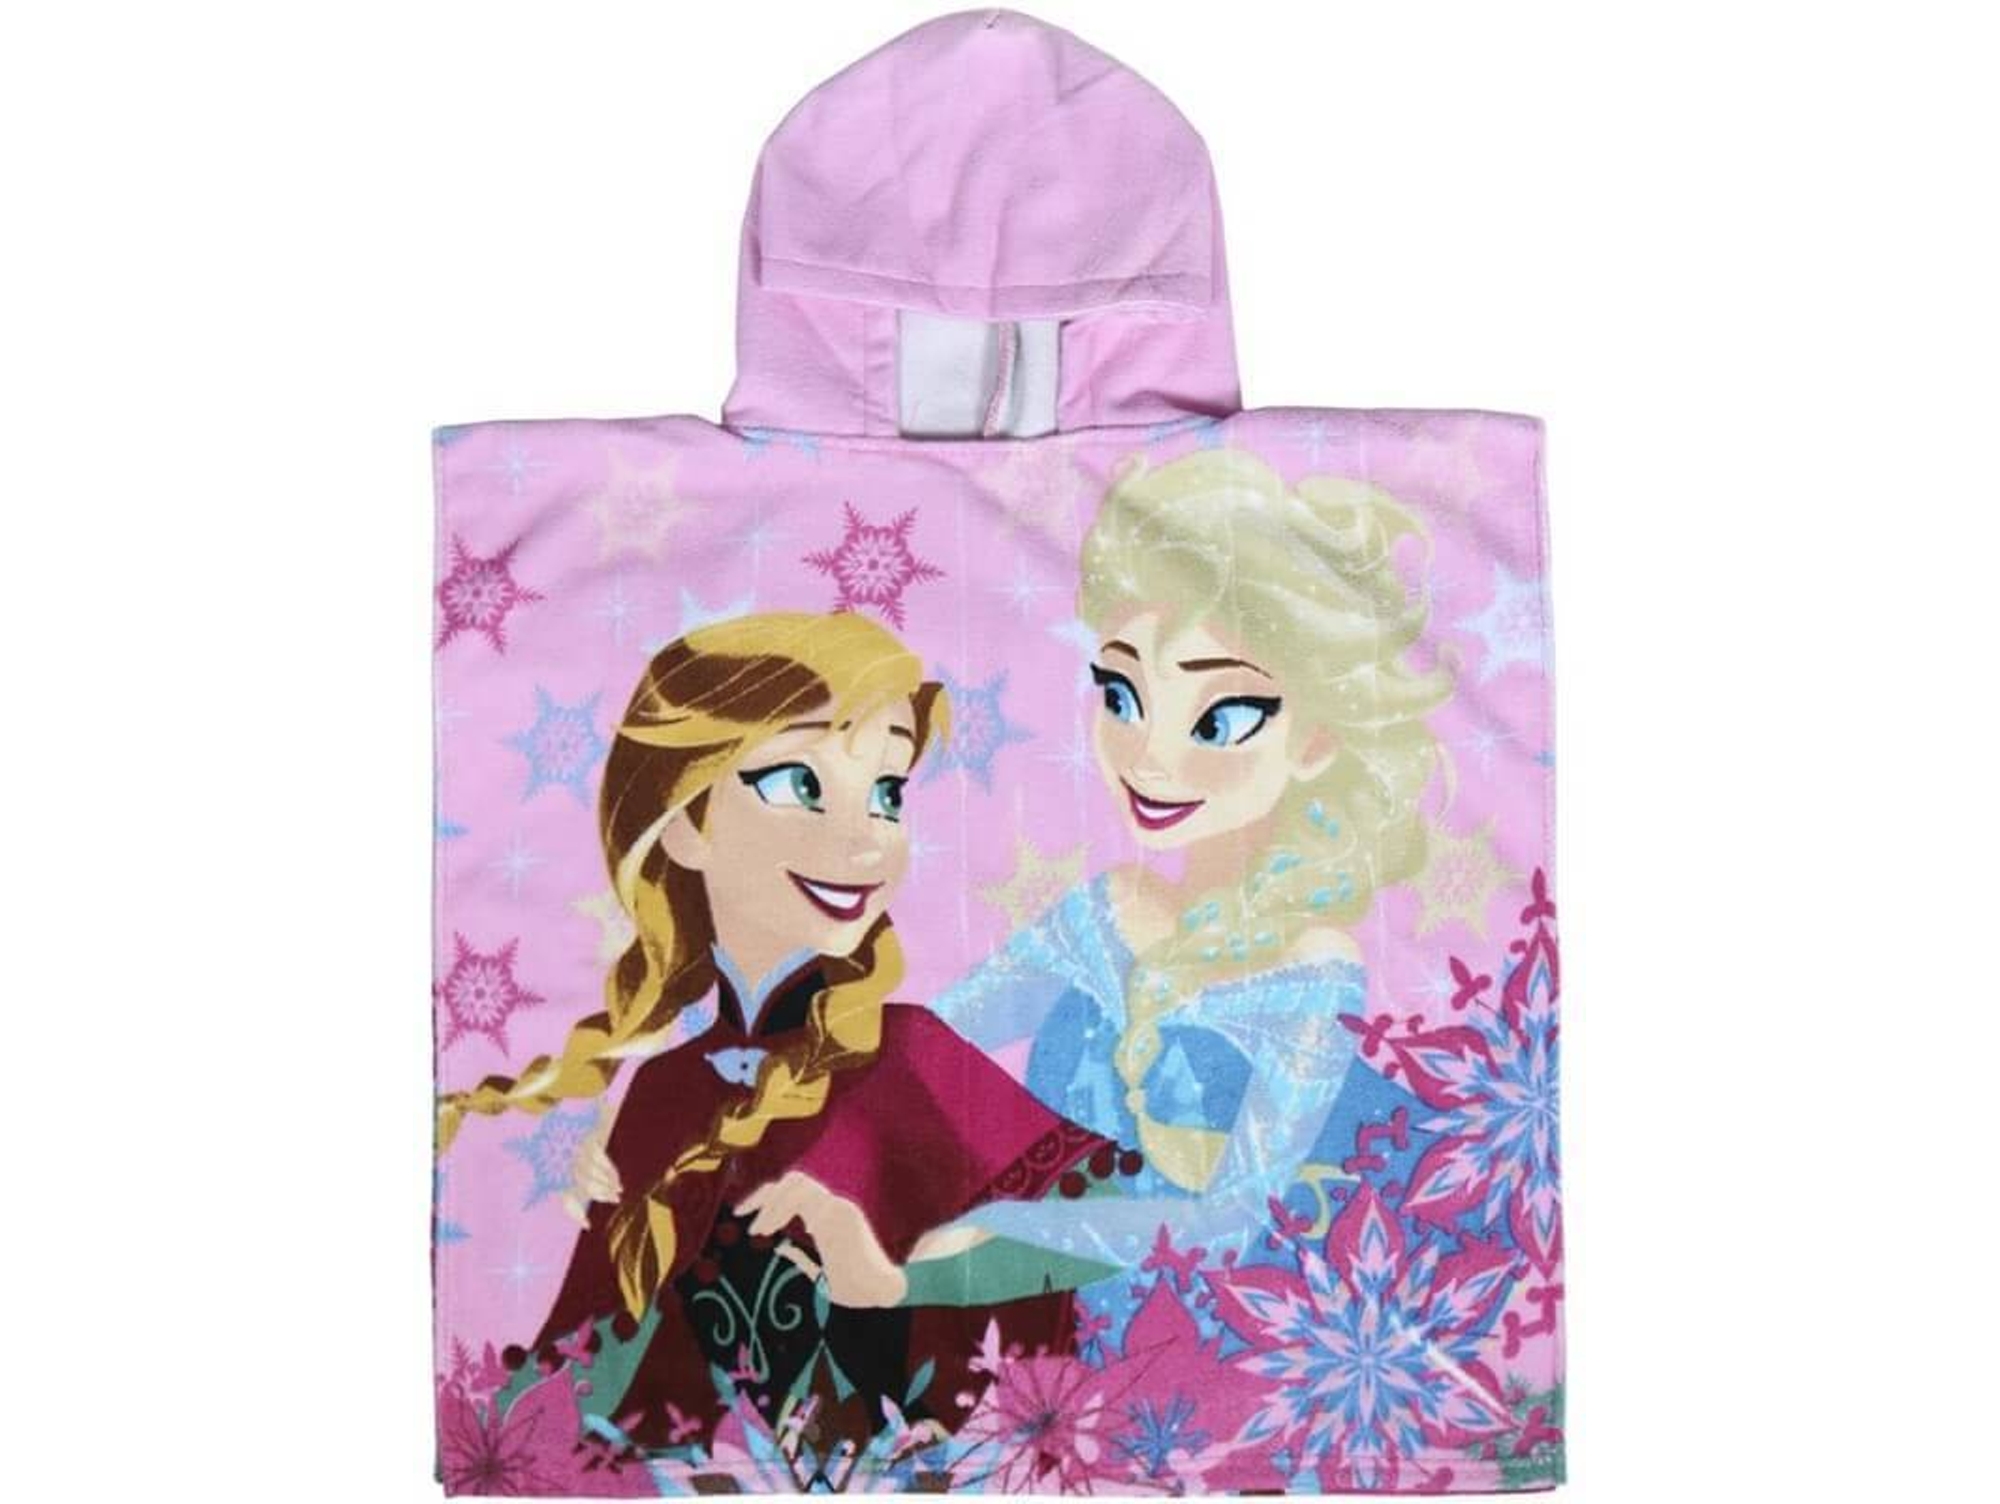 Cerda Disney Frozen Pink Hooded Poncho Towel 60 x 120cm RRP 11.99 CLEARANCE XL 2.99 or 2 for 5